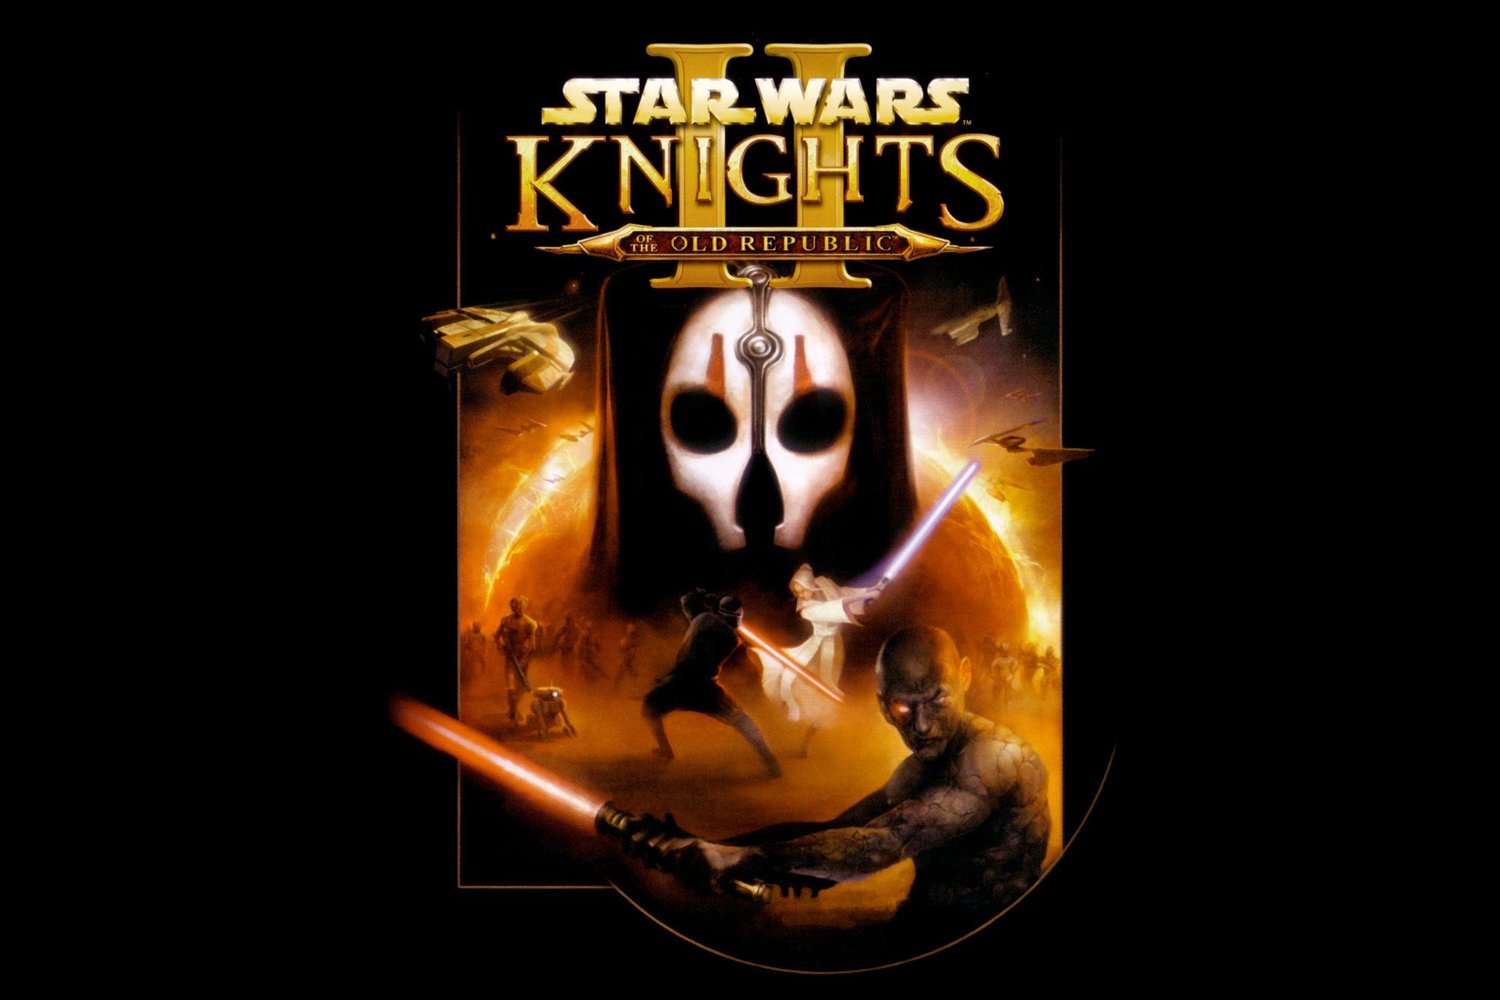 Star wars knights of the old republic русификатор steam фото 89